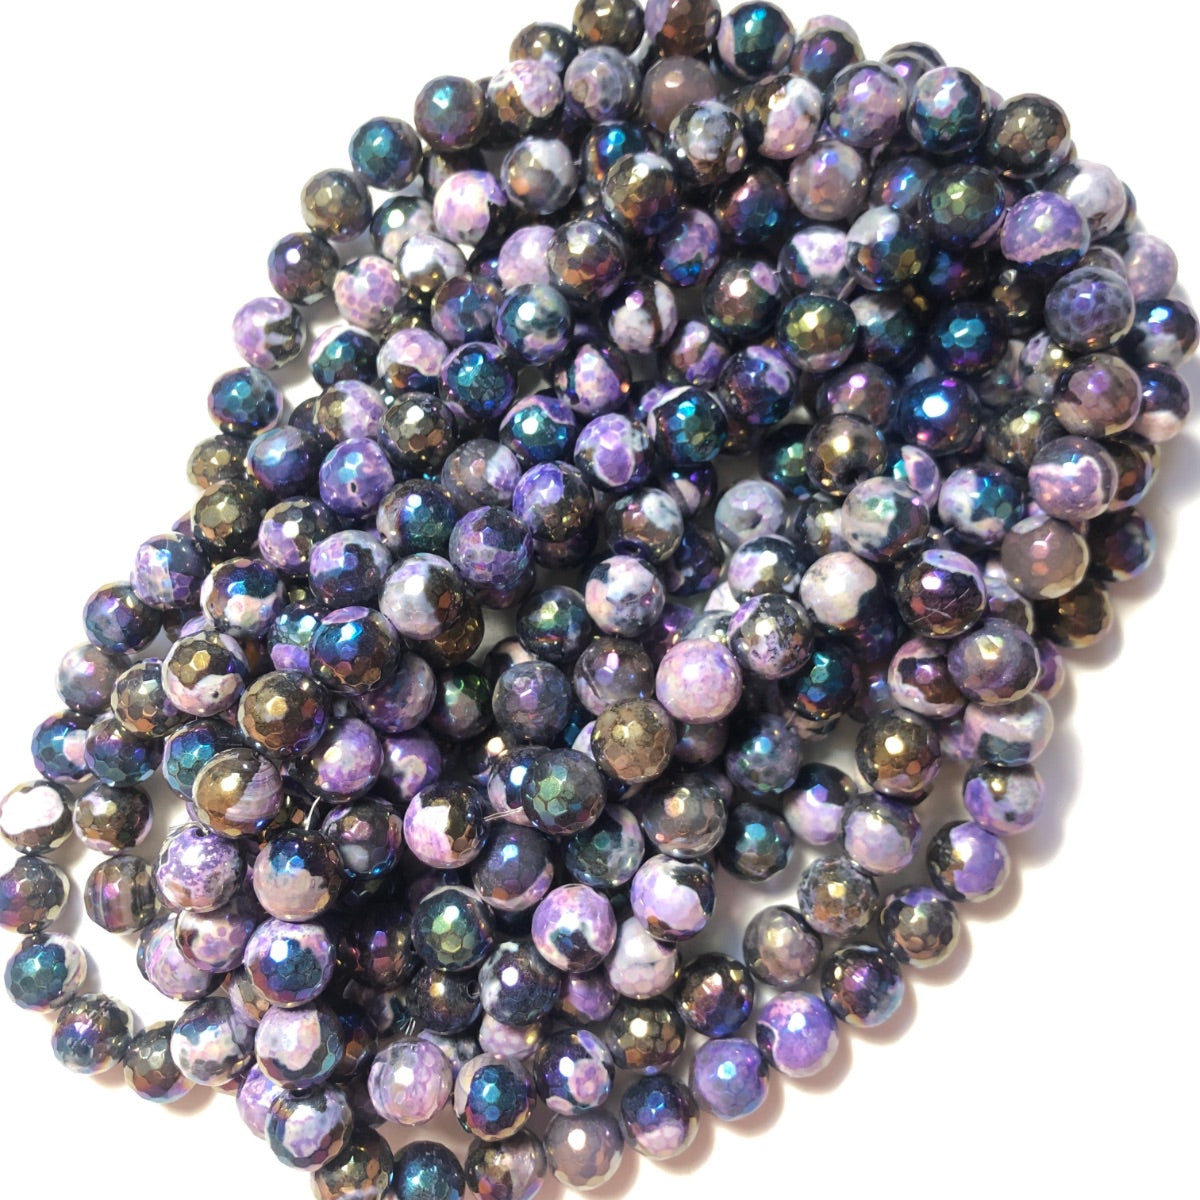 2 Strands/lot 12mm Electroplated AB Purple Black Fire Agate Faceted Stone Beads Electroplated Beads 12mm Stone Beads Electroplated Faceted Agate Beads New Beads Arrivals Charms Beads Beyond